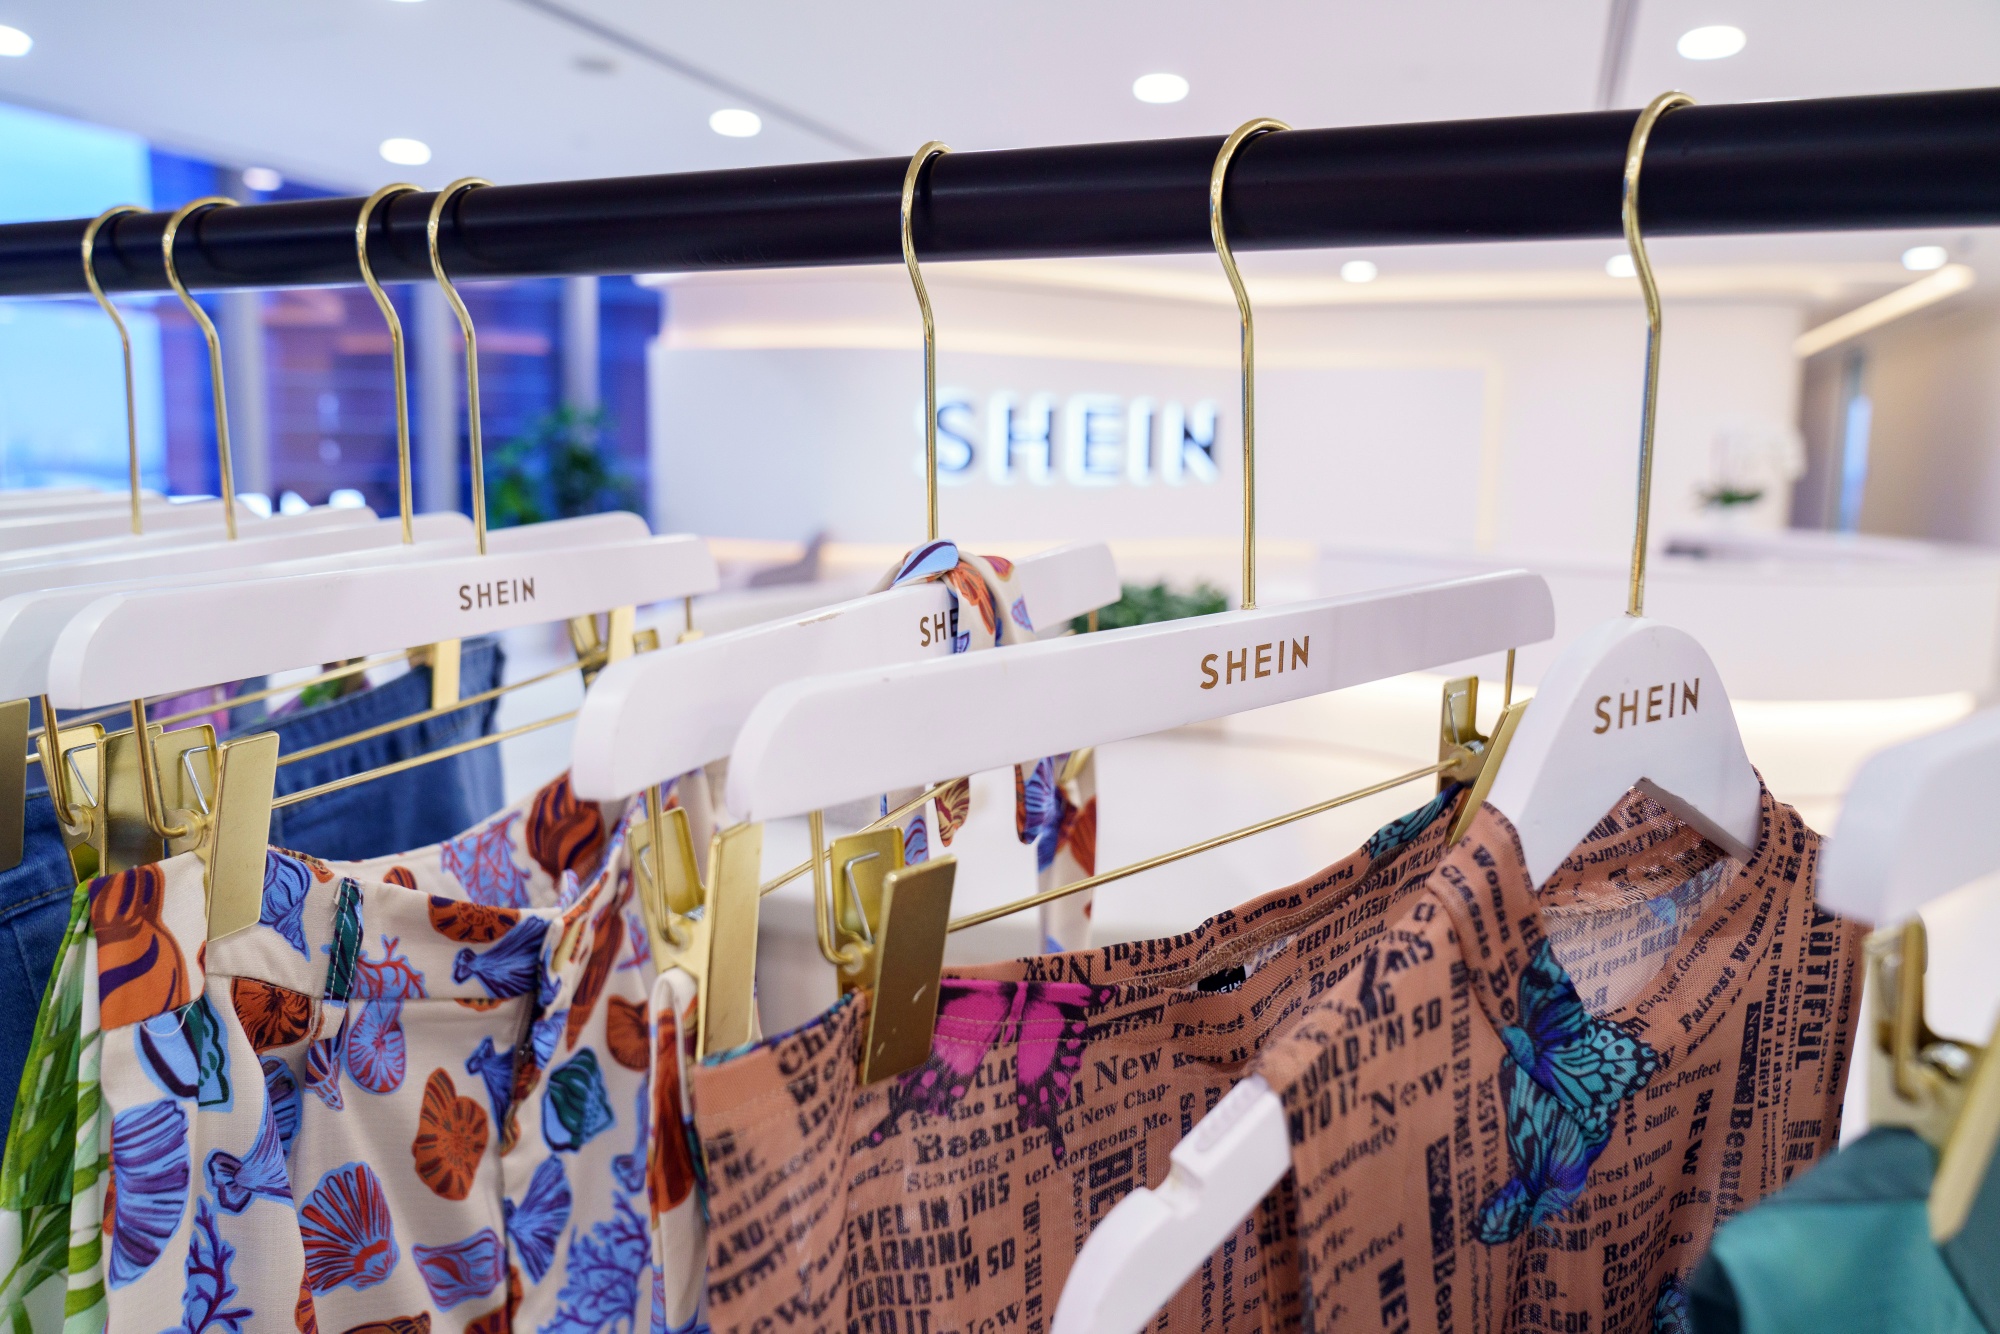 Shein's U.S. Expansion Adds Pressure for Fast-Fashion Competitors